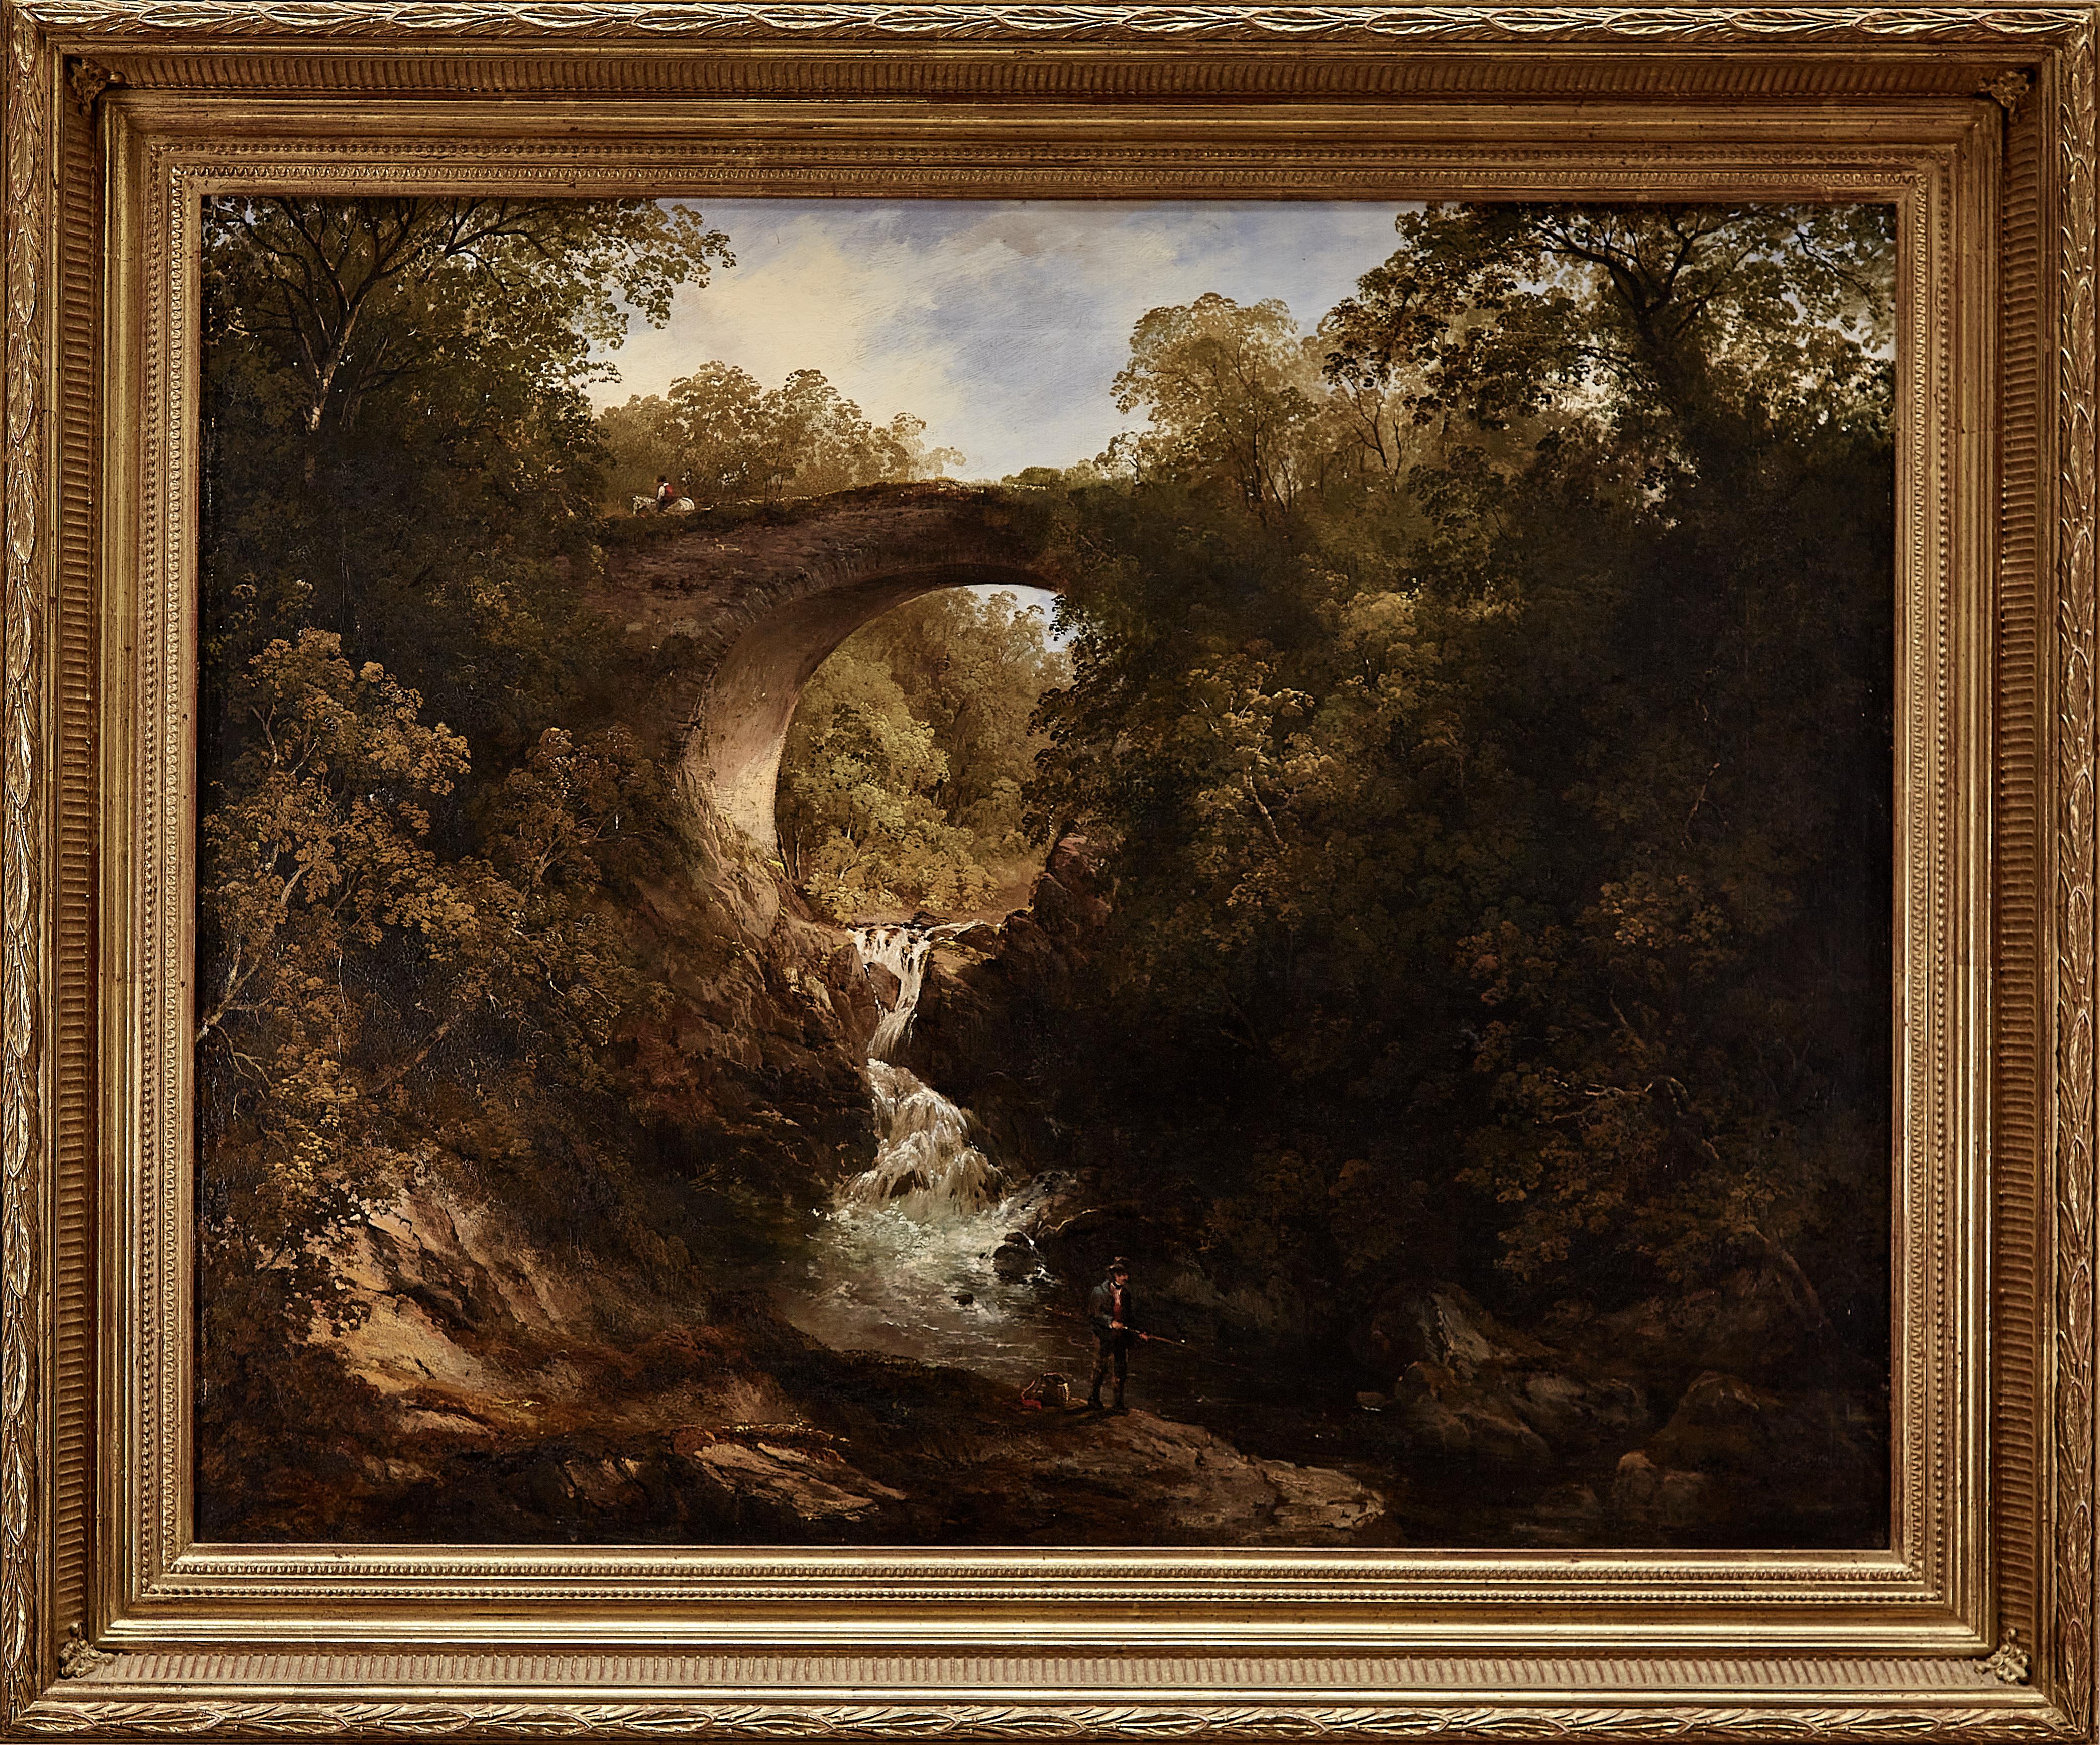 Frances Stoddart Landscape Painting - 19th century Scottish wooded landscape with stone bridge over a flowing river